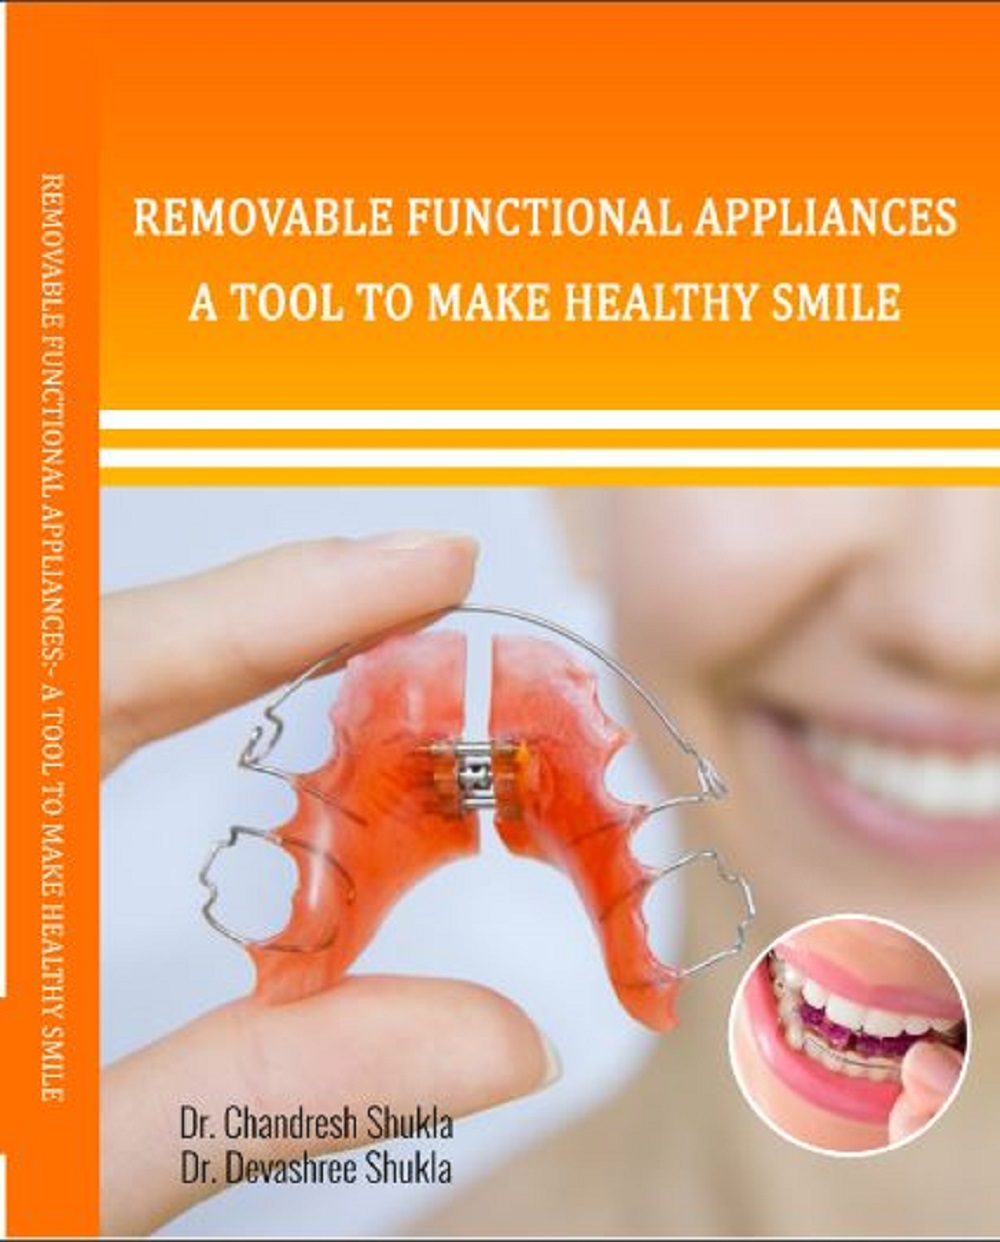 REMOVABLE FUNCTIONAL APPLIANCES:- A TOOL TO MAKE HEALTHY SMILE